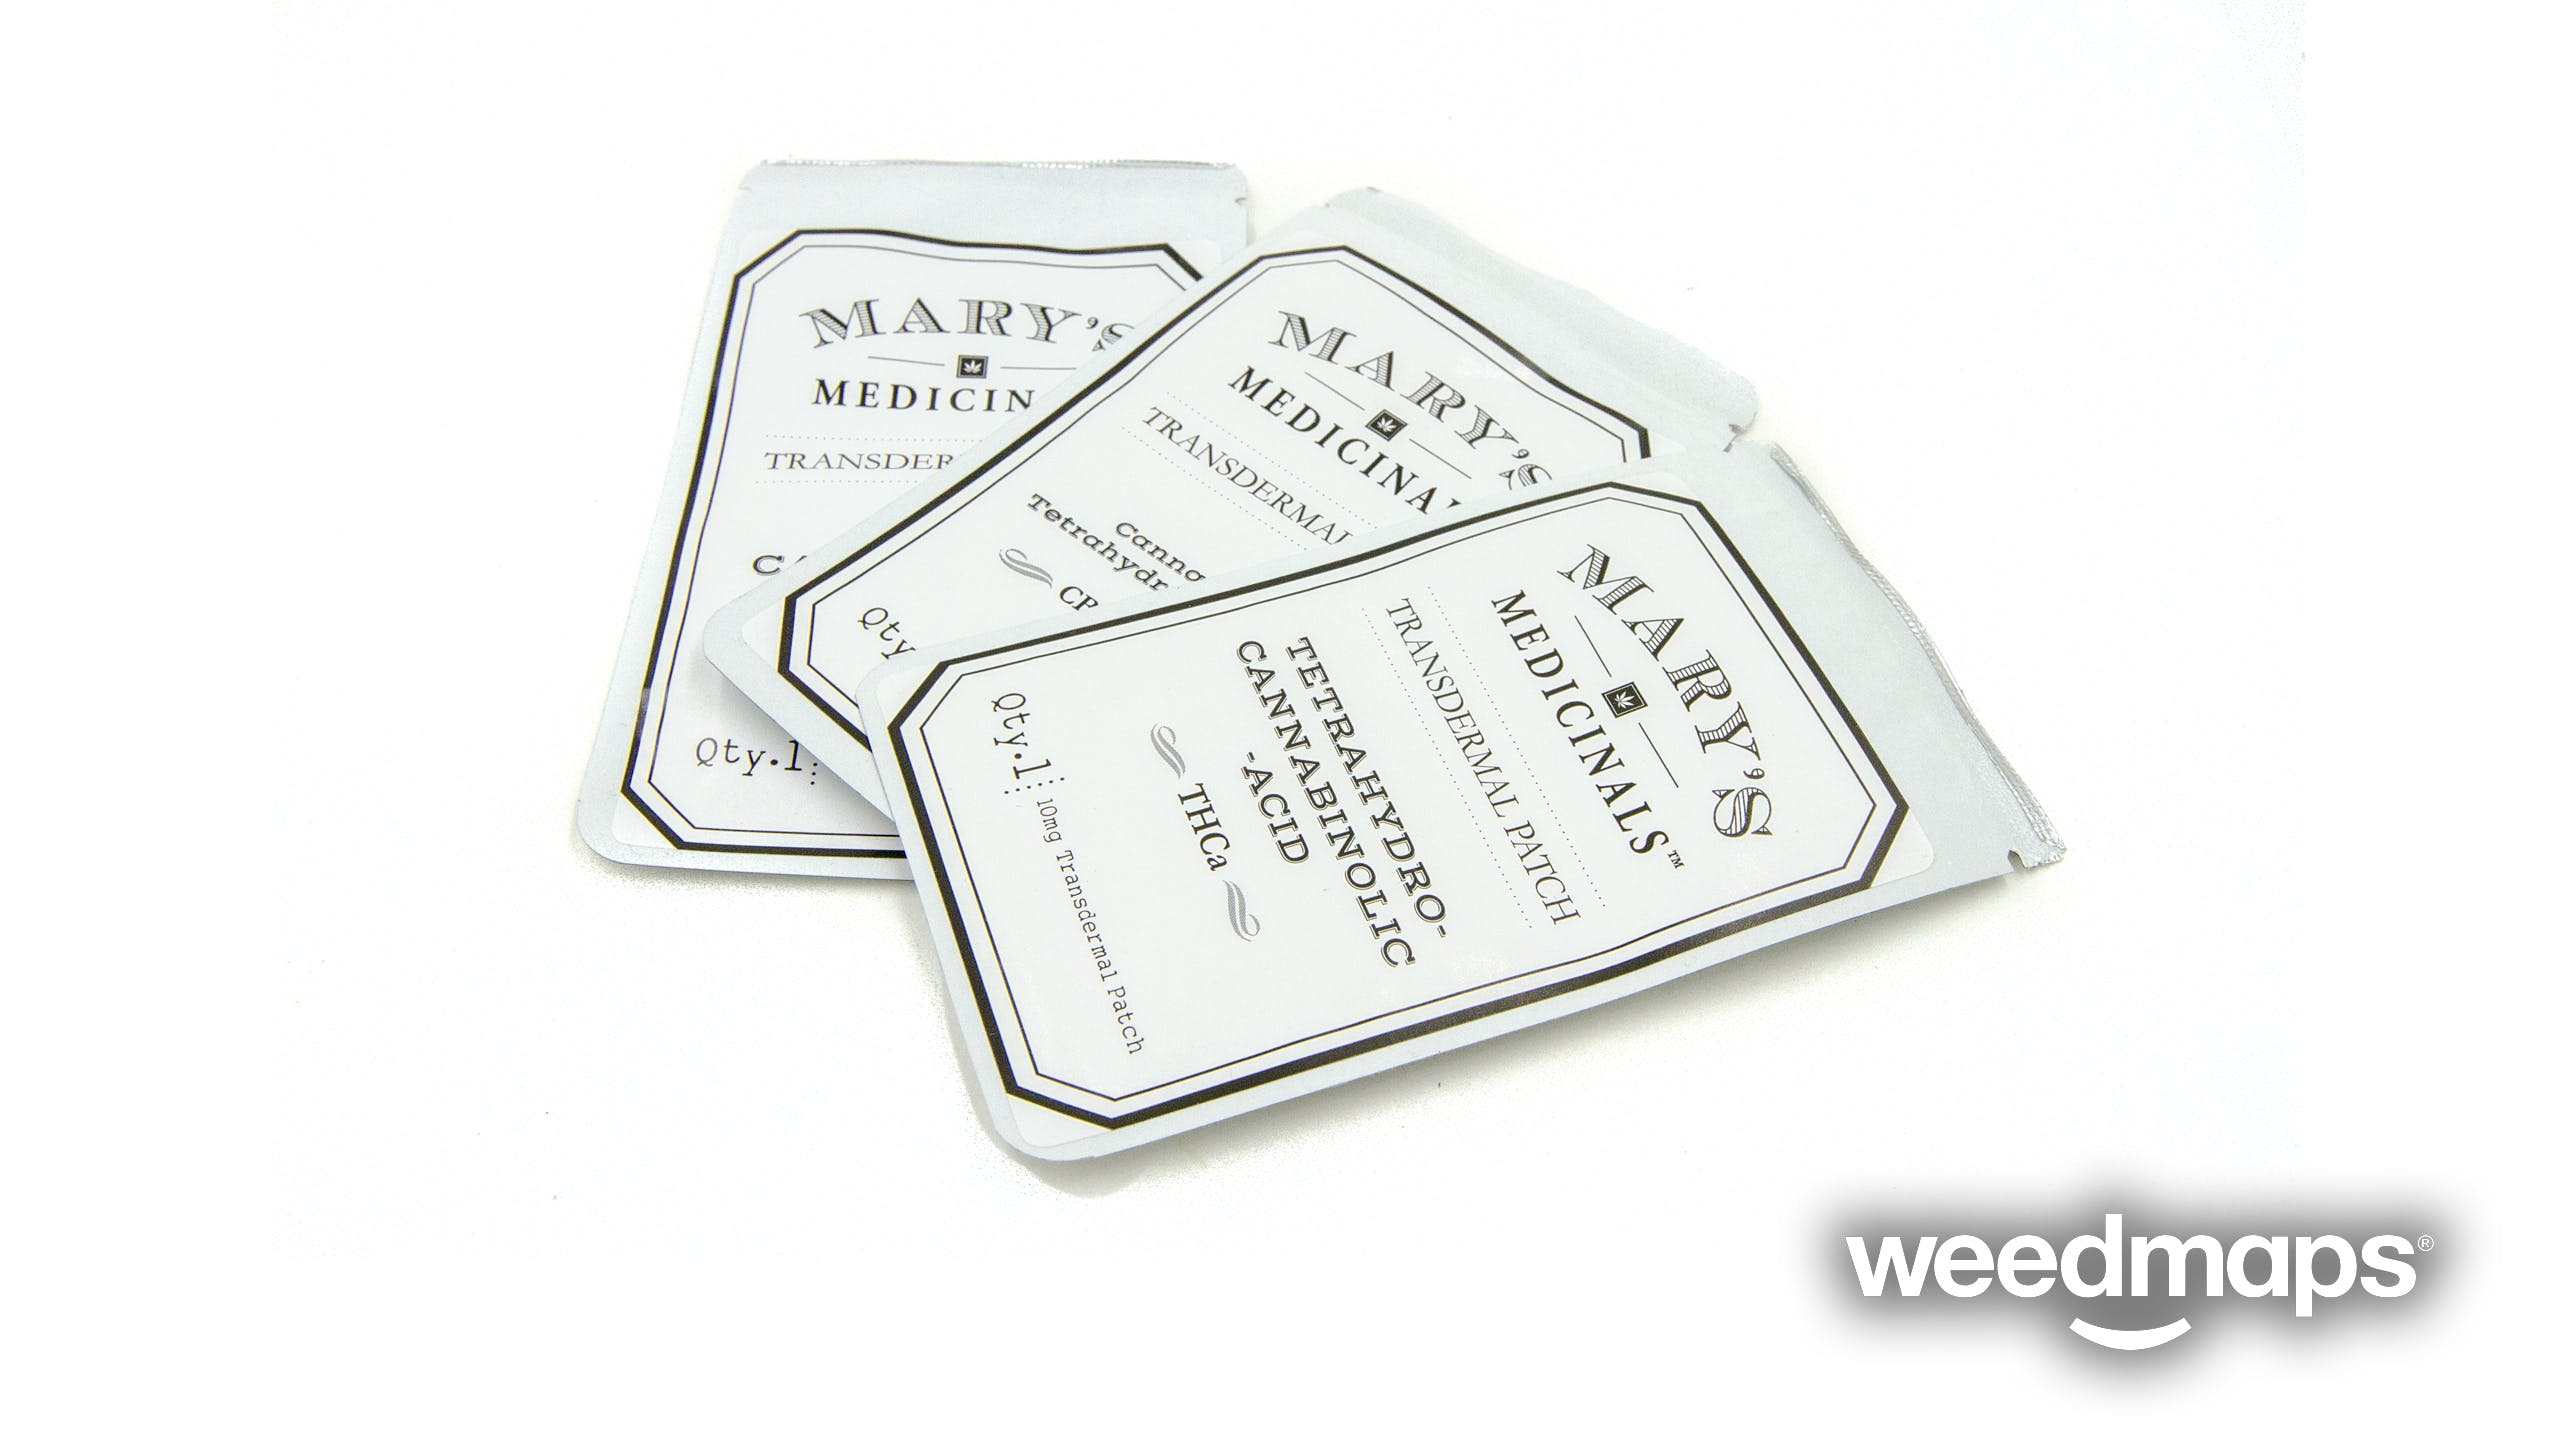 topicals-marys-medicinals-cbn-patch-30-pack